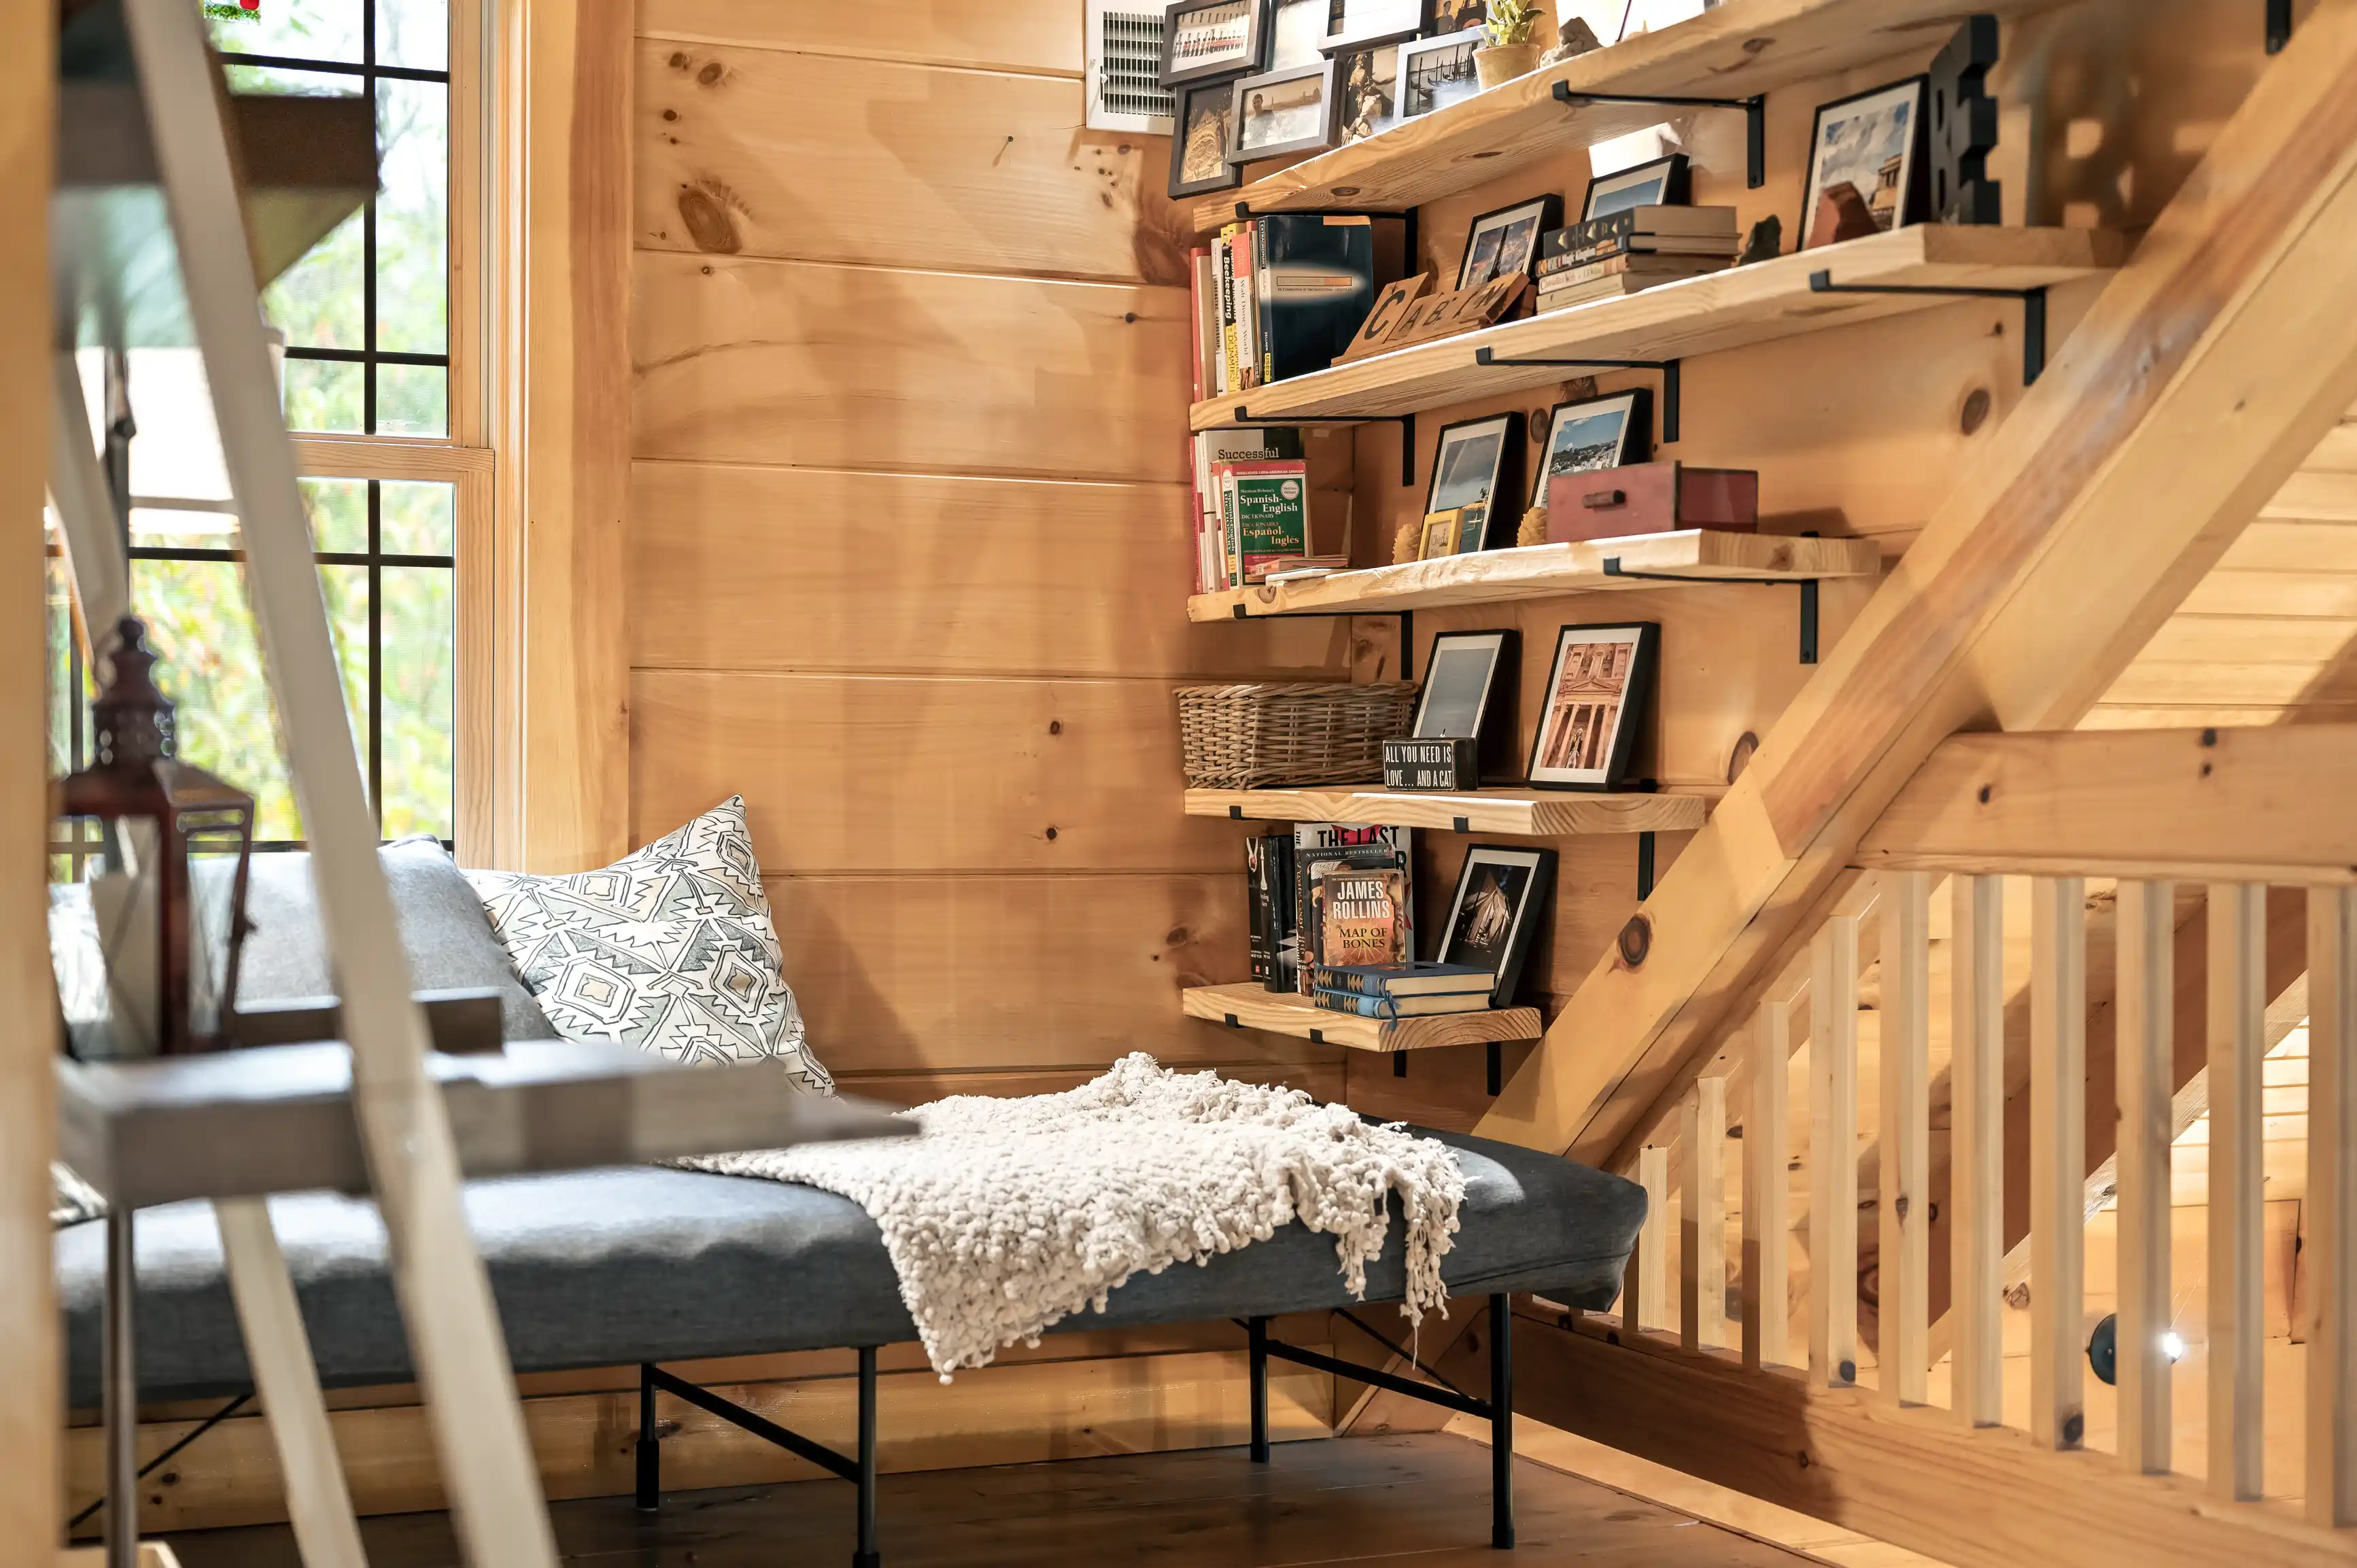 Cozy wooden cabin interior with a staircase lined with bookshelves full of books and framed photos, and a window seat with cushions and a throw blanket.